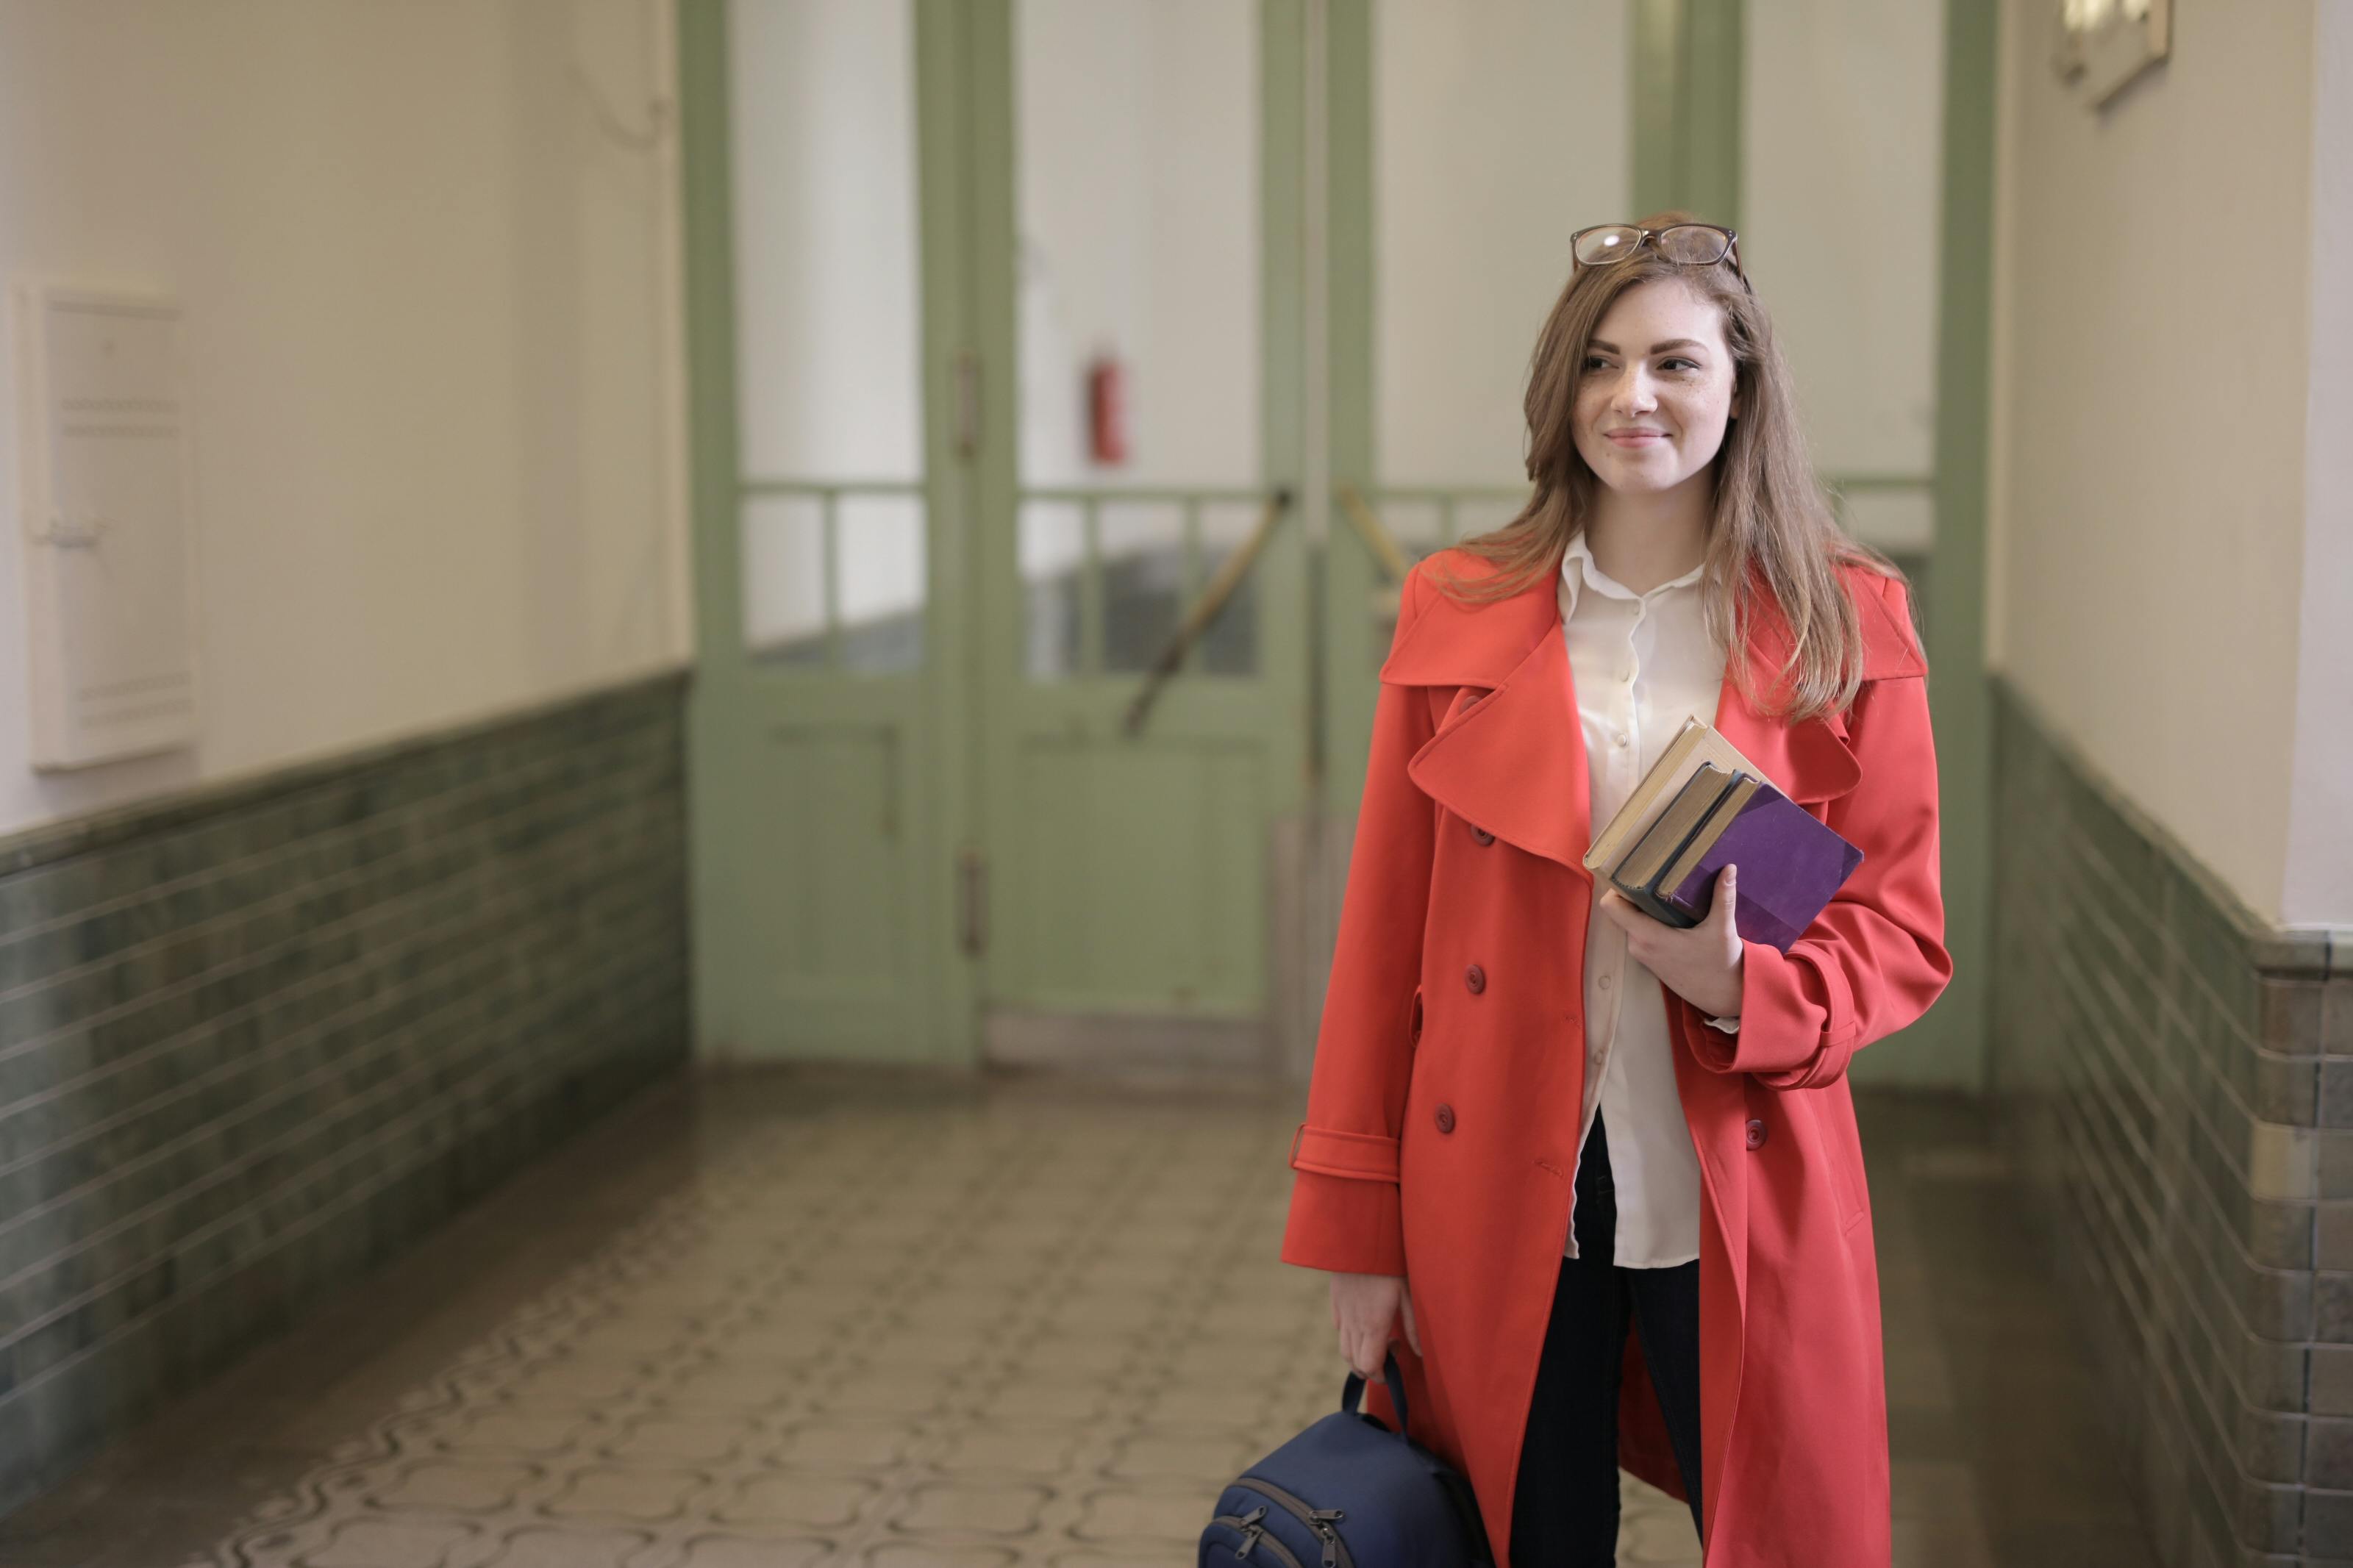 A female student holding books and a backpack | Source: Pexels